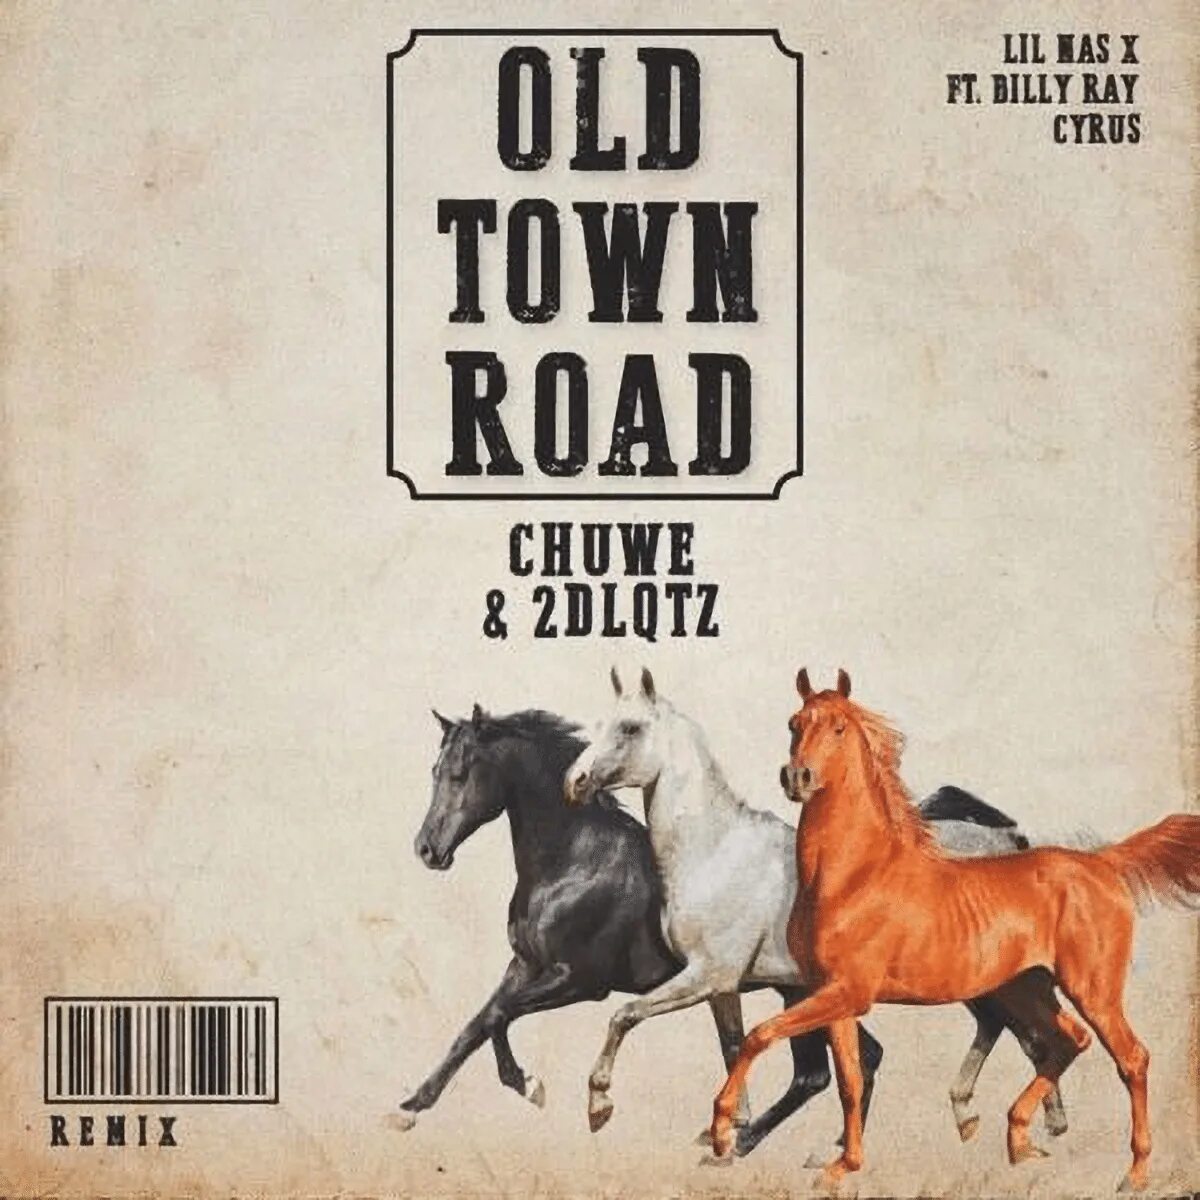 Lil nas x feat. Billy ray Cyrus - old Town Road. Old Town Road (feat. Billy ray Cyrus) [Remix] Lil nas x. Old Town Road обложка.